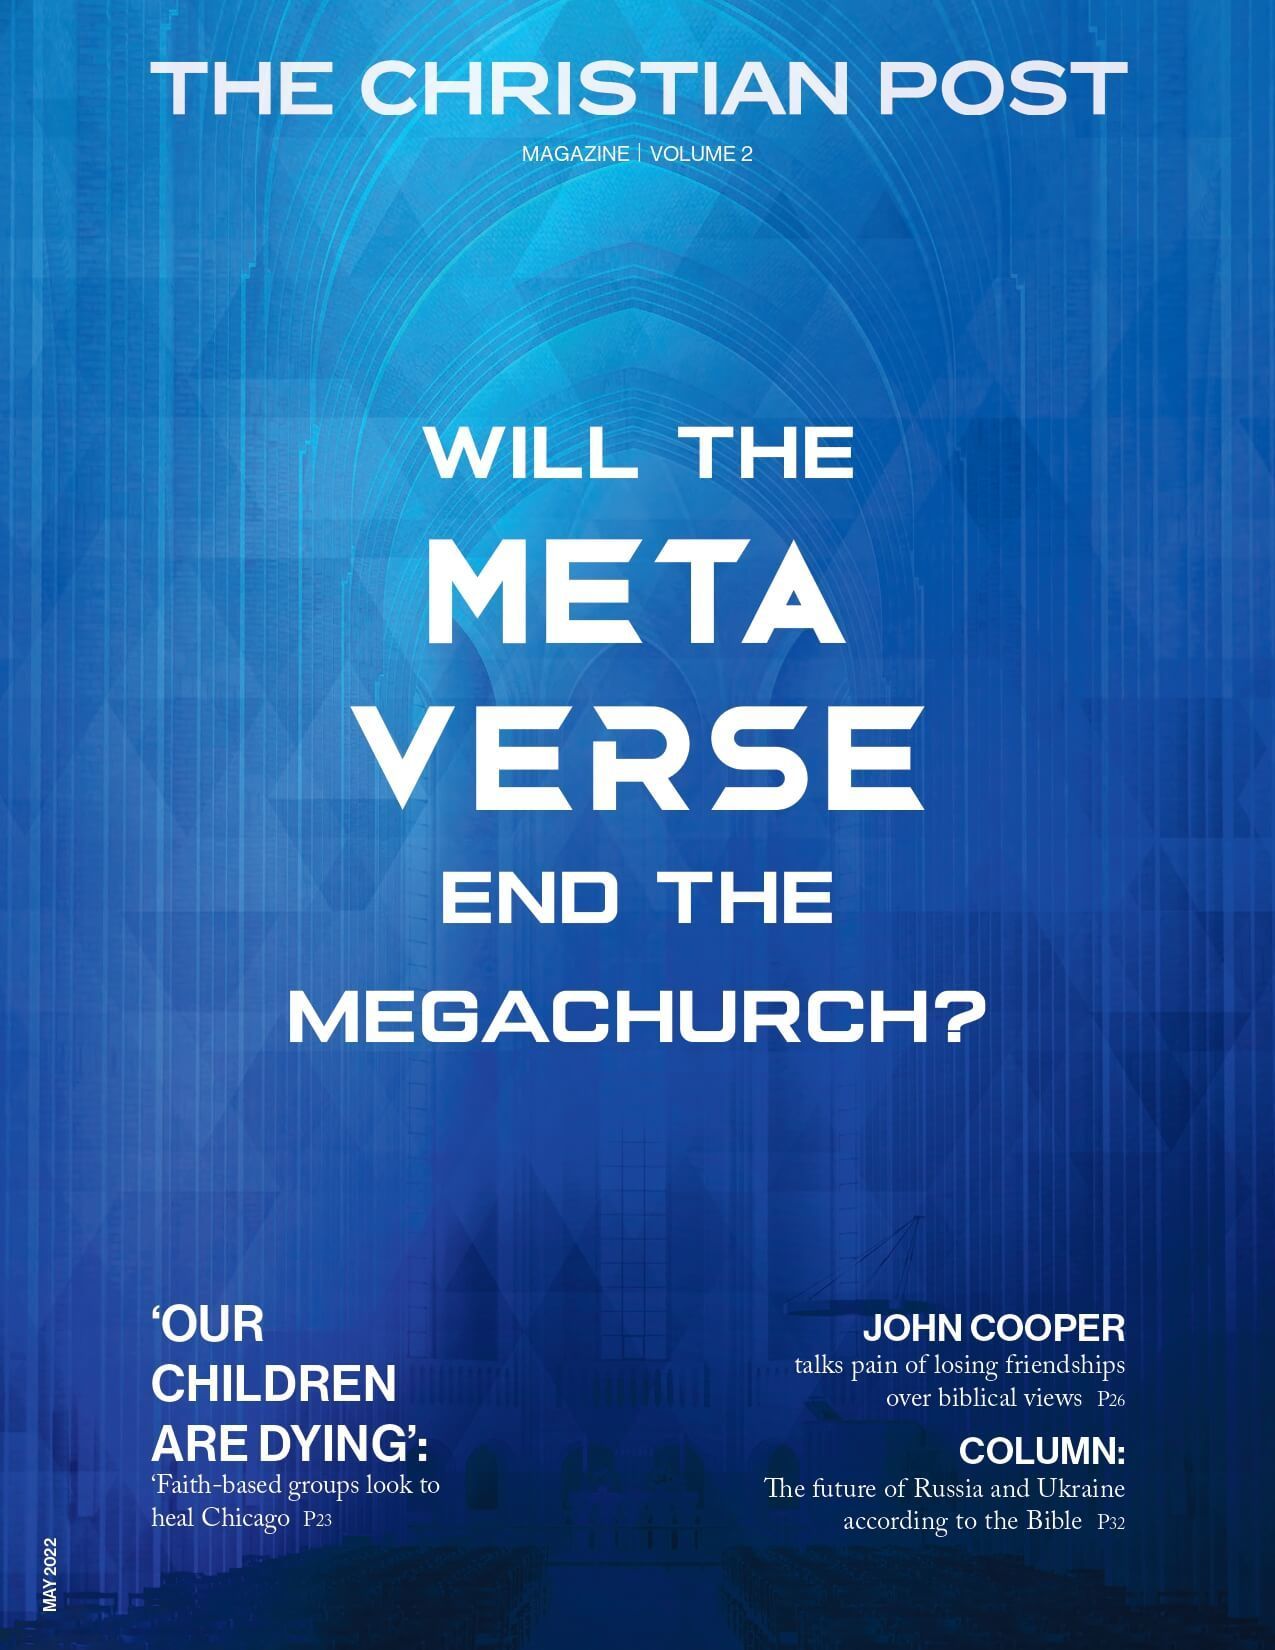 Will the metaverse end the megachurch?